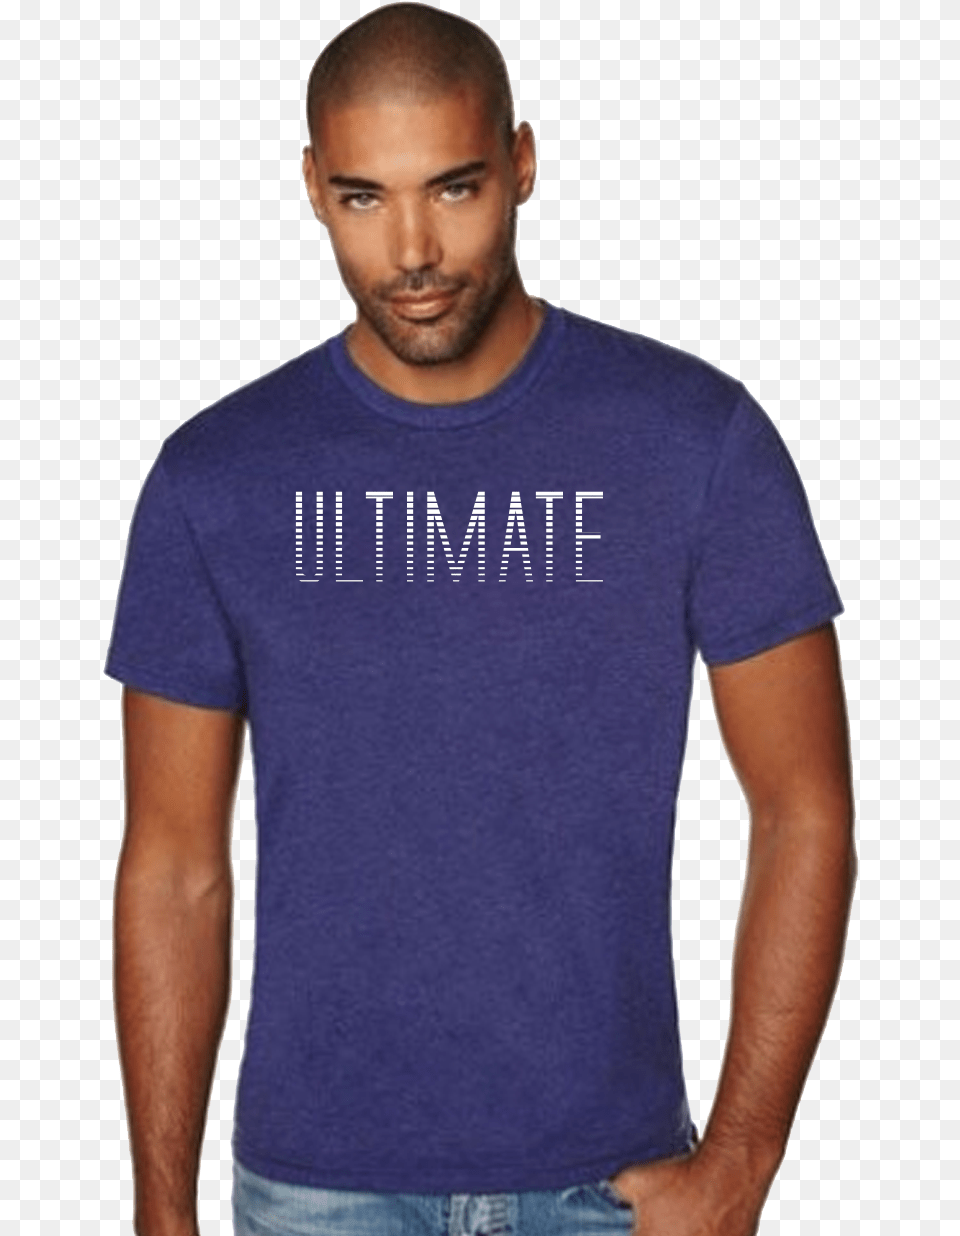 Ultimate Model Purple Tee, T-shirt, Clothing, Shirt, Person Png Image